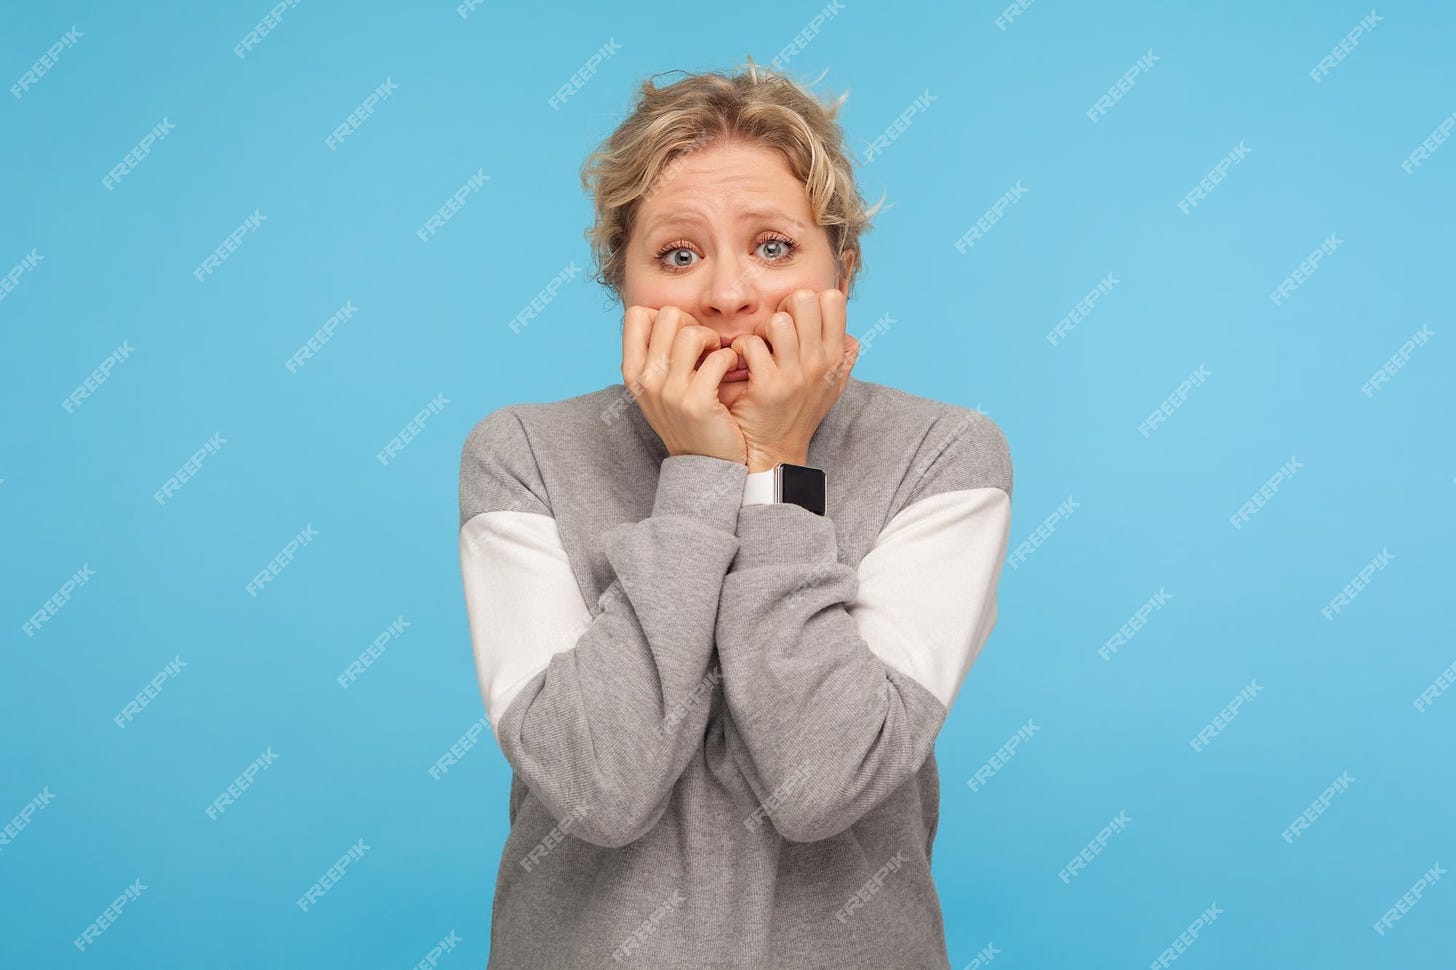 Premium Photo | Neurotic person nervous scared woman with curly hair in  sweatshirt biting nails fingers anxiety disorder feeling stressed worried  about failure indoor studio shot isolated on blue background